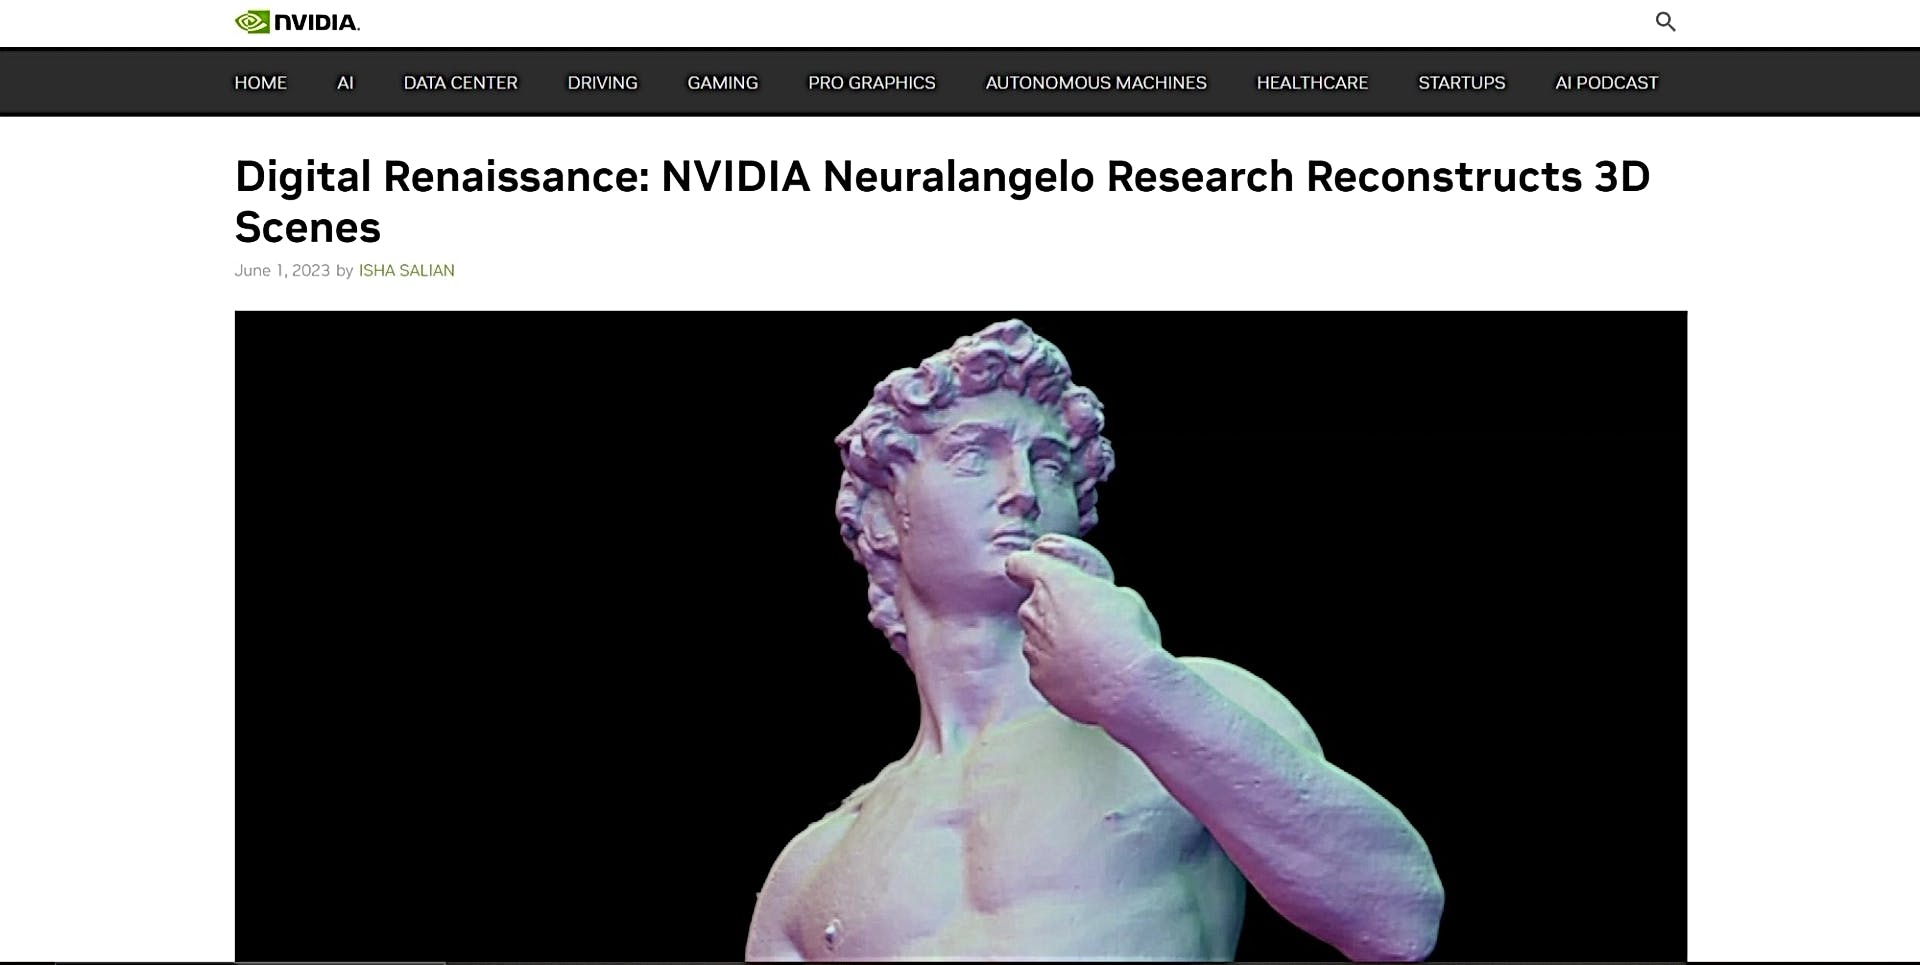 Neuralangelo by NVIDIA featured